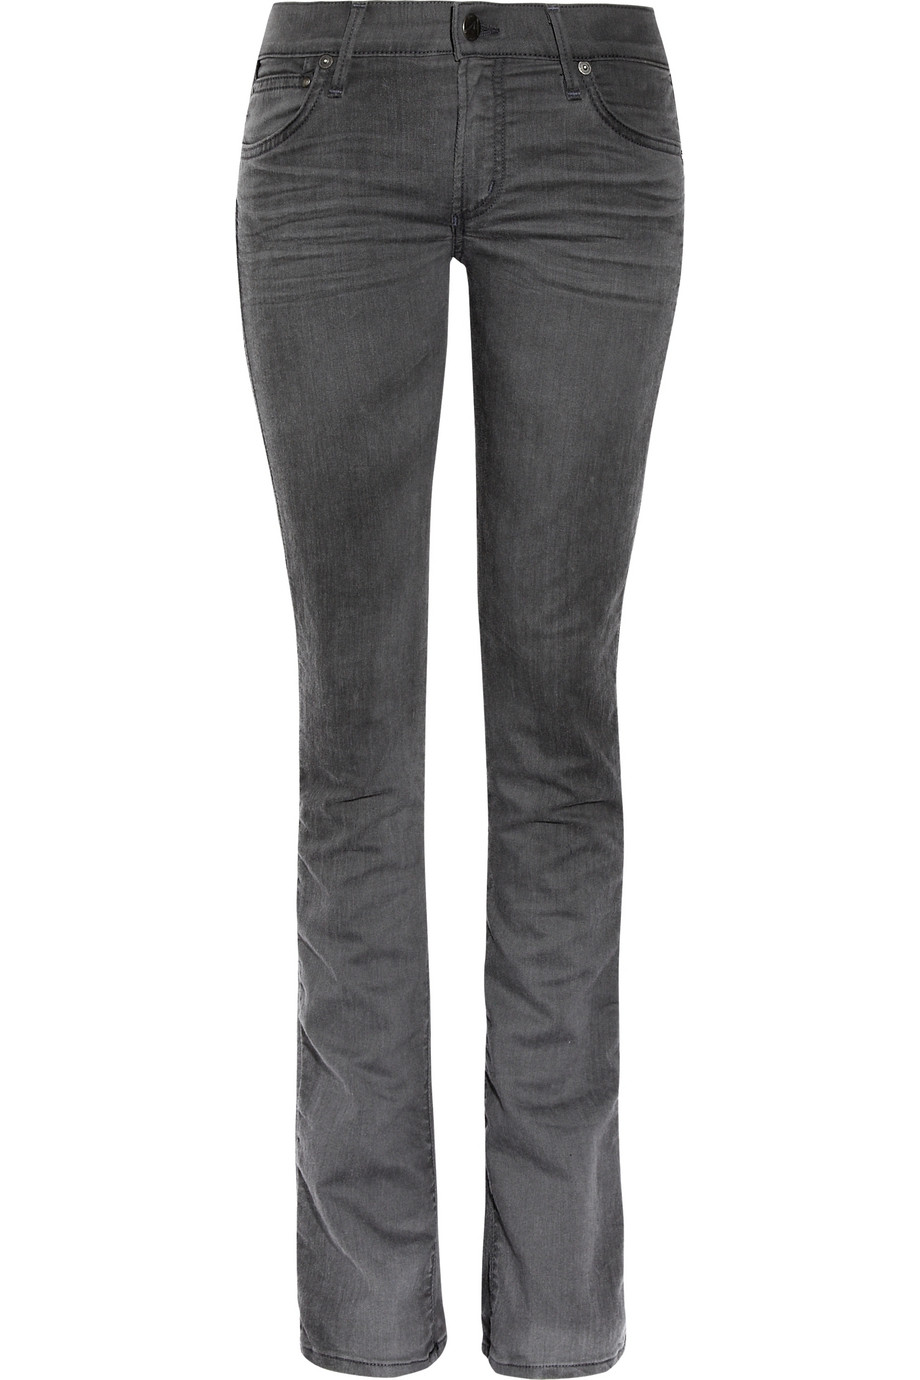 Citizens of Humanity Morrison Mid-rise Bootcut Jeans in Gray - Lyst